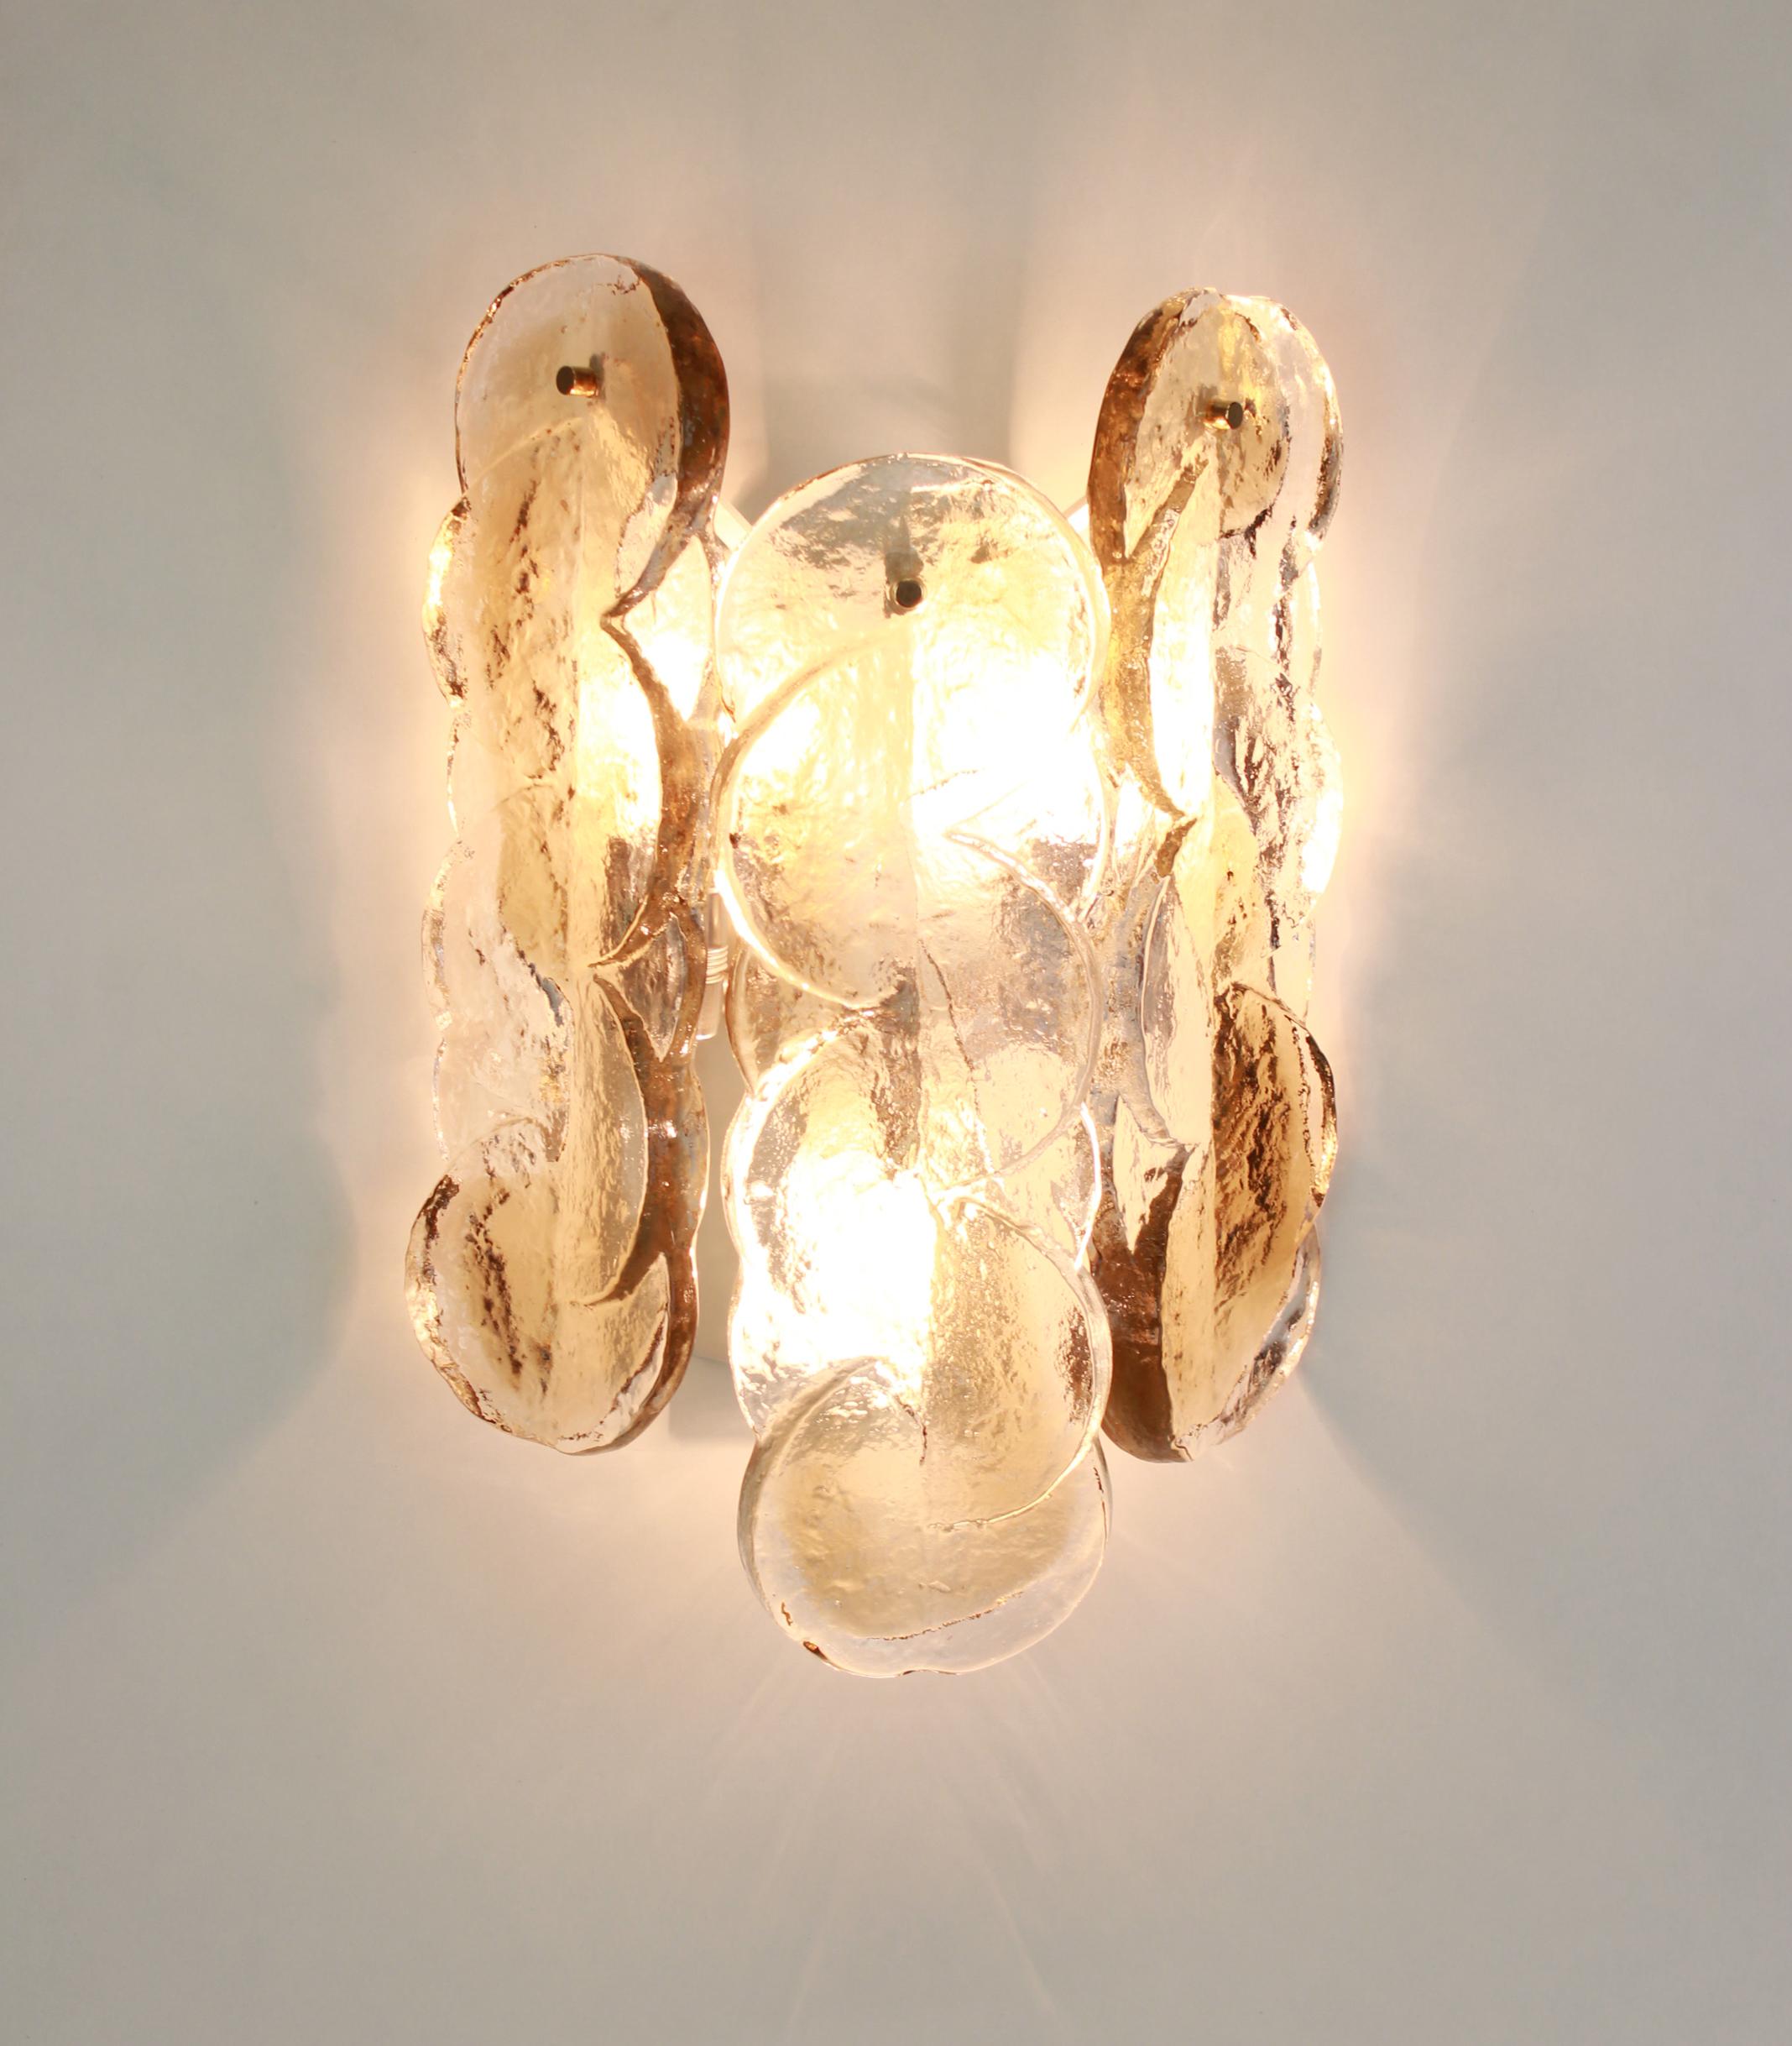 1 of 3 Pairs of Large Kalmar Sconces Wall Lights, Austria, 1960s For Sale 1